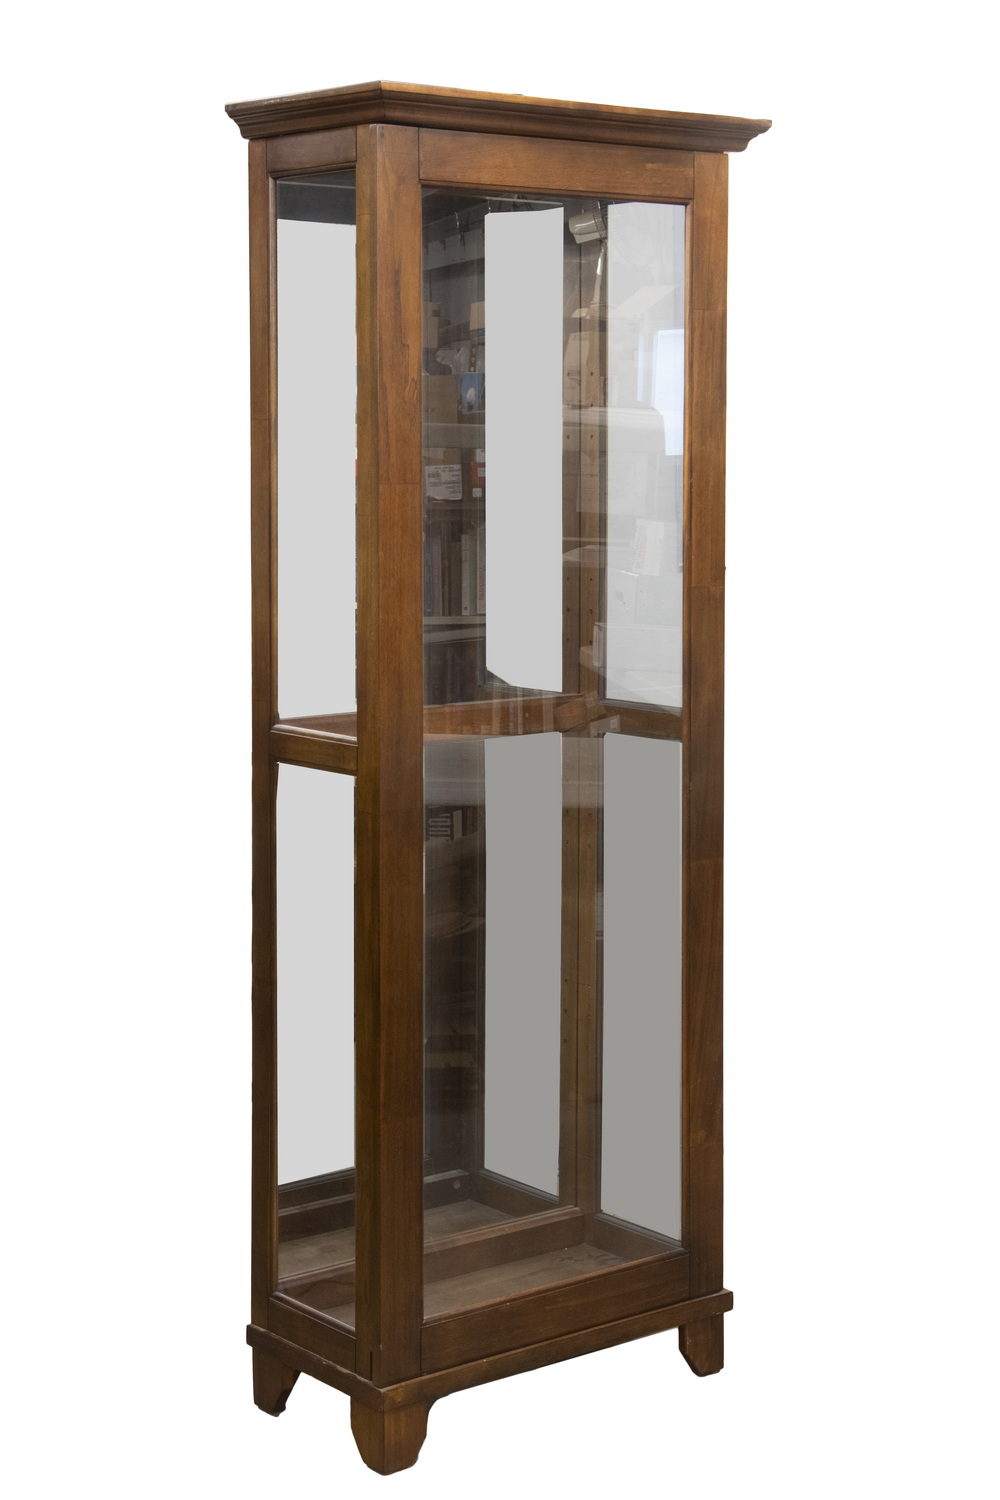 CONTEMPORARY GLASS & WOOD DISPLAY CASE